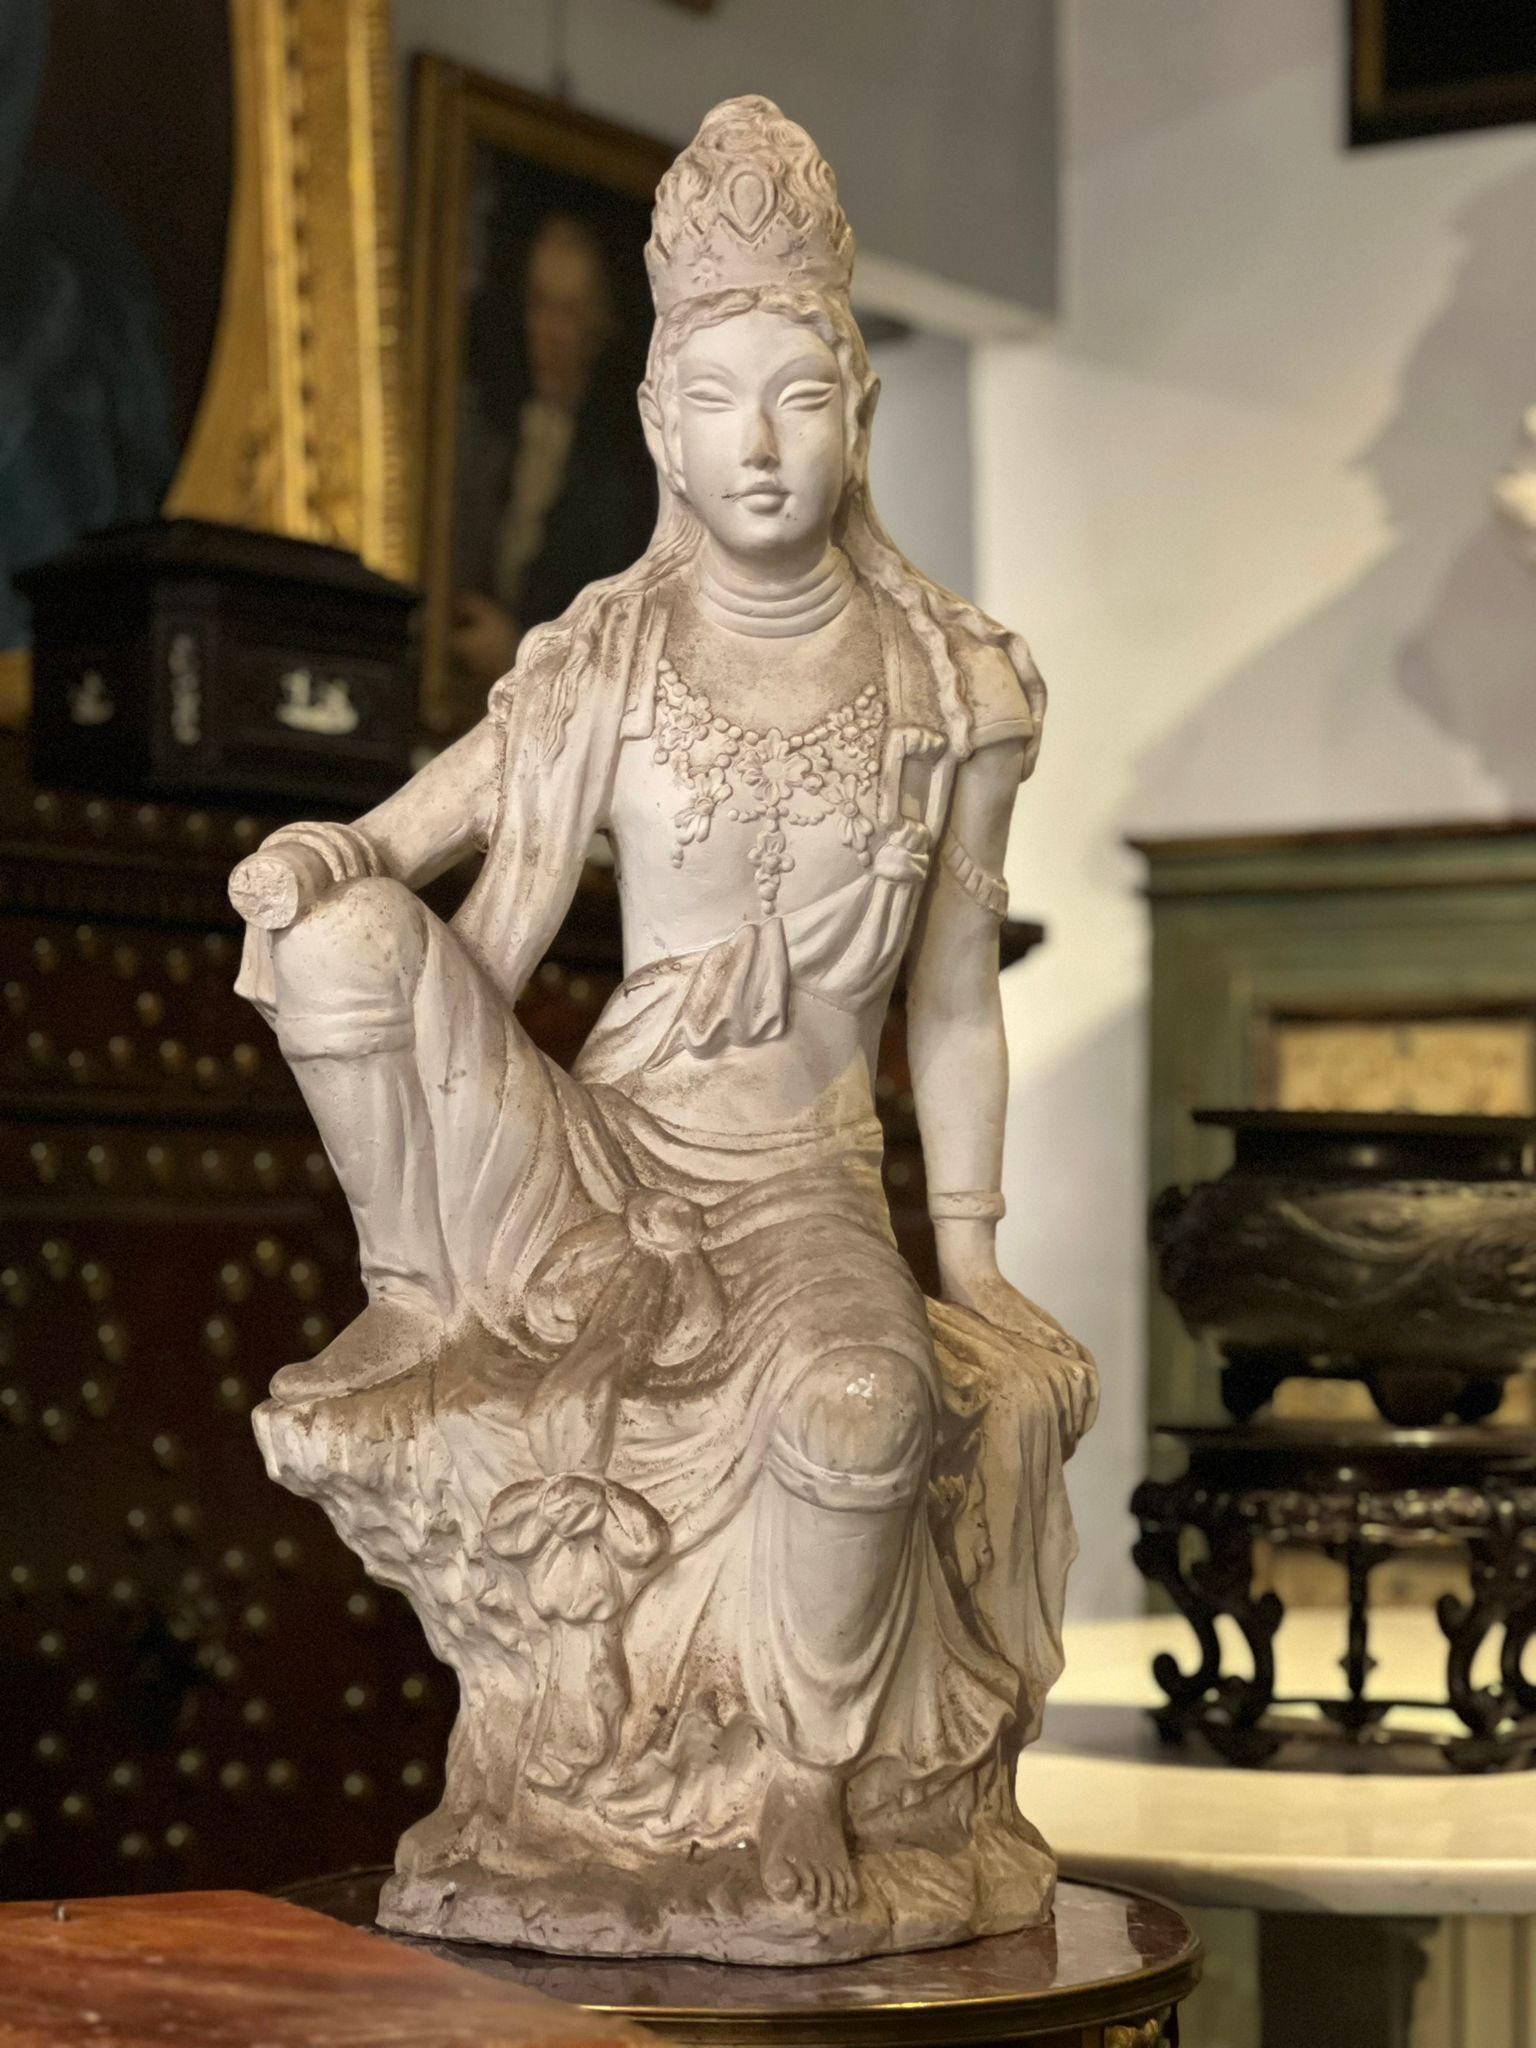 Beautiful white terracotta sculpture depicting an oriental goddess. Extremely refined drapery, garments and headgear, Tuscany, early 20th century.

- The hand of the sculpture needs to be reglued.